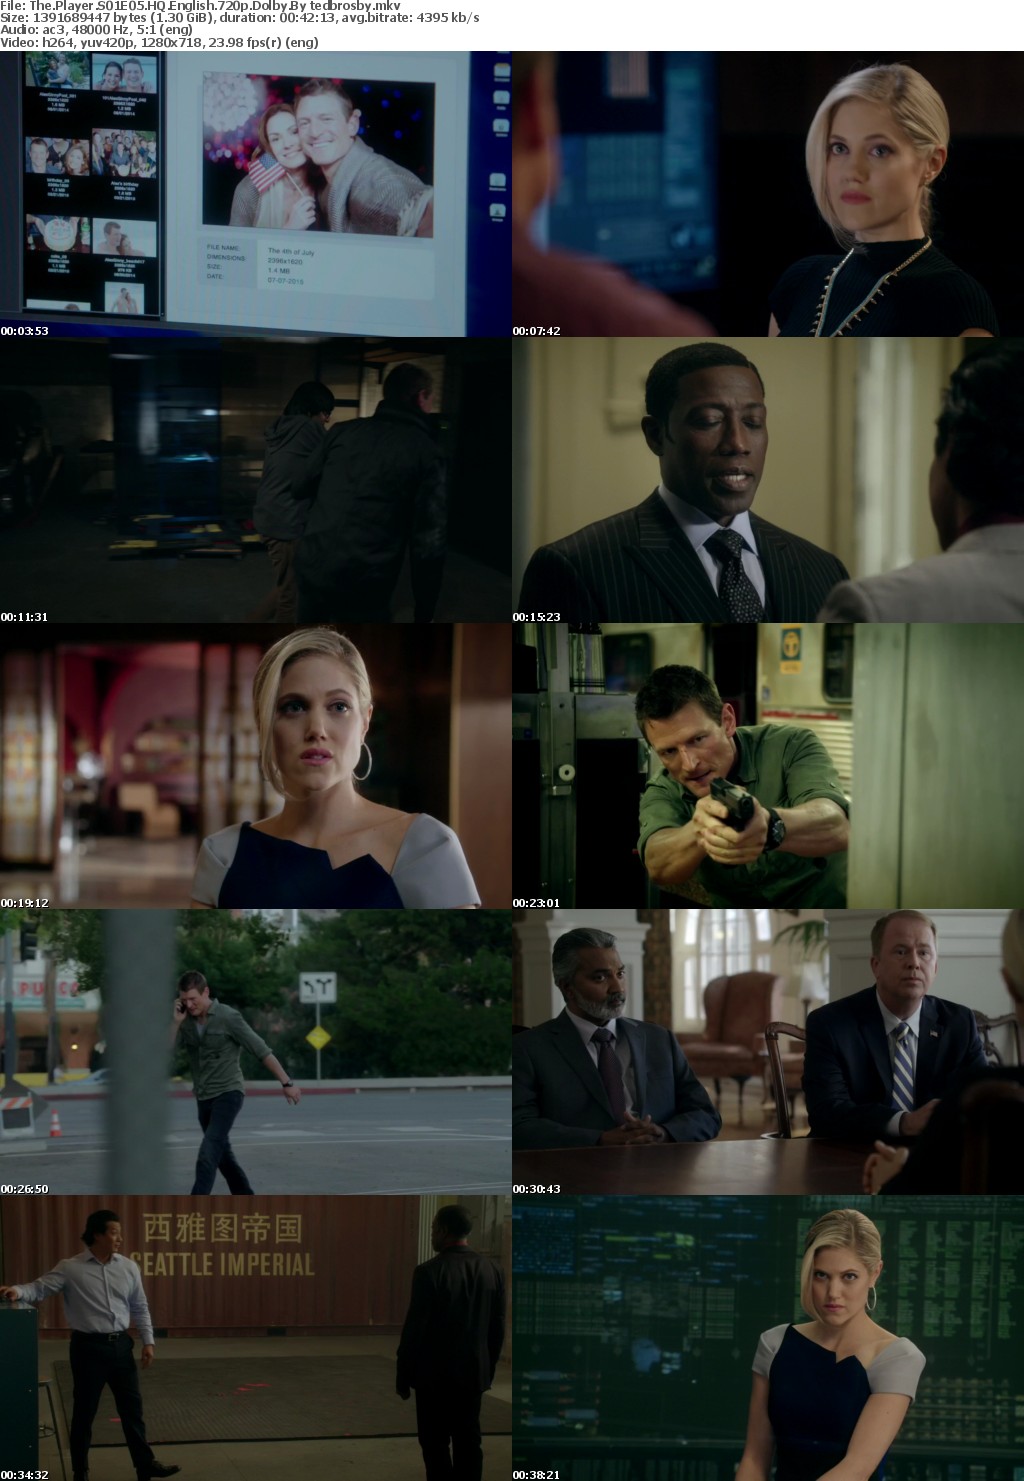 The Player (2015) ( S1) Episode 5 HQ-720p ENGLISH